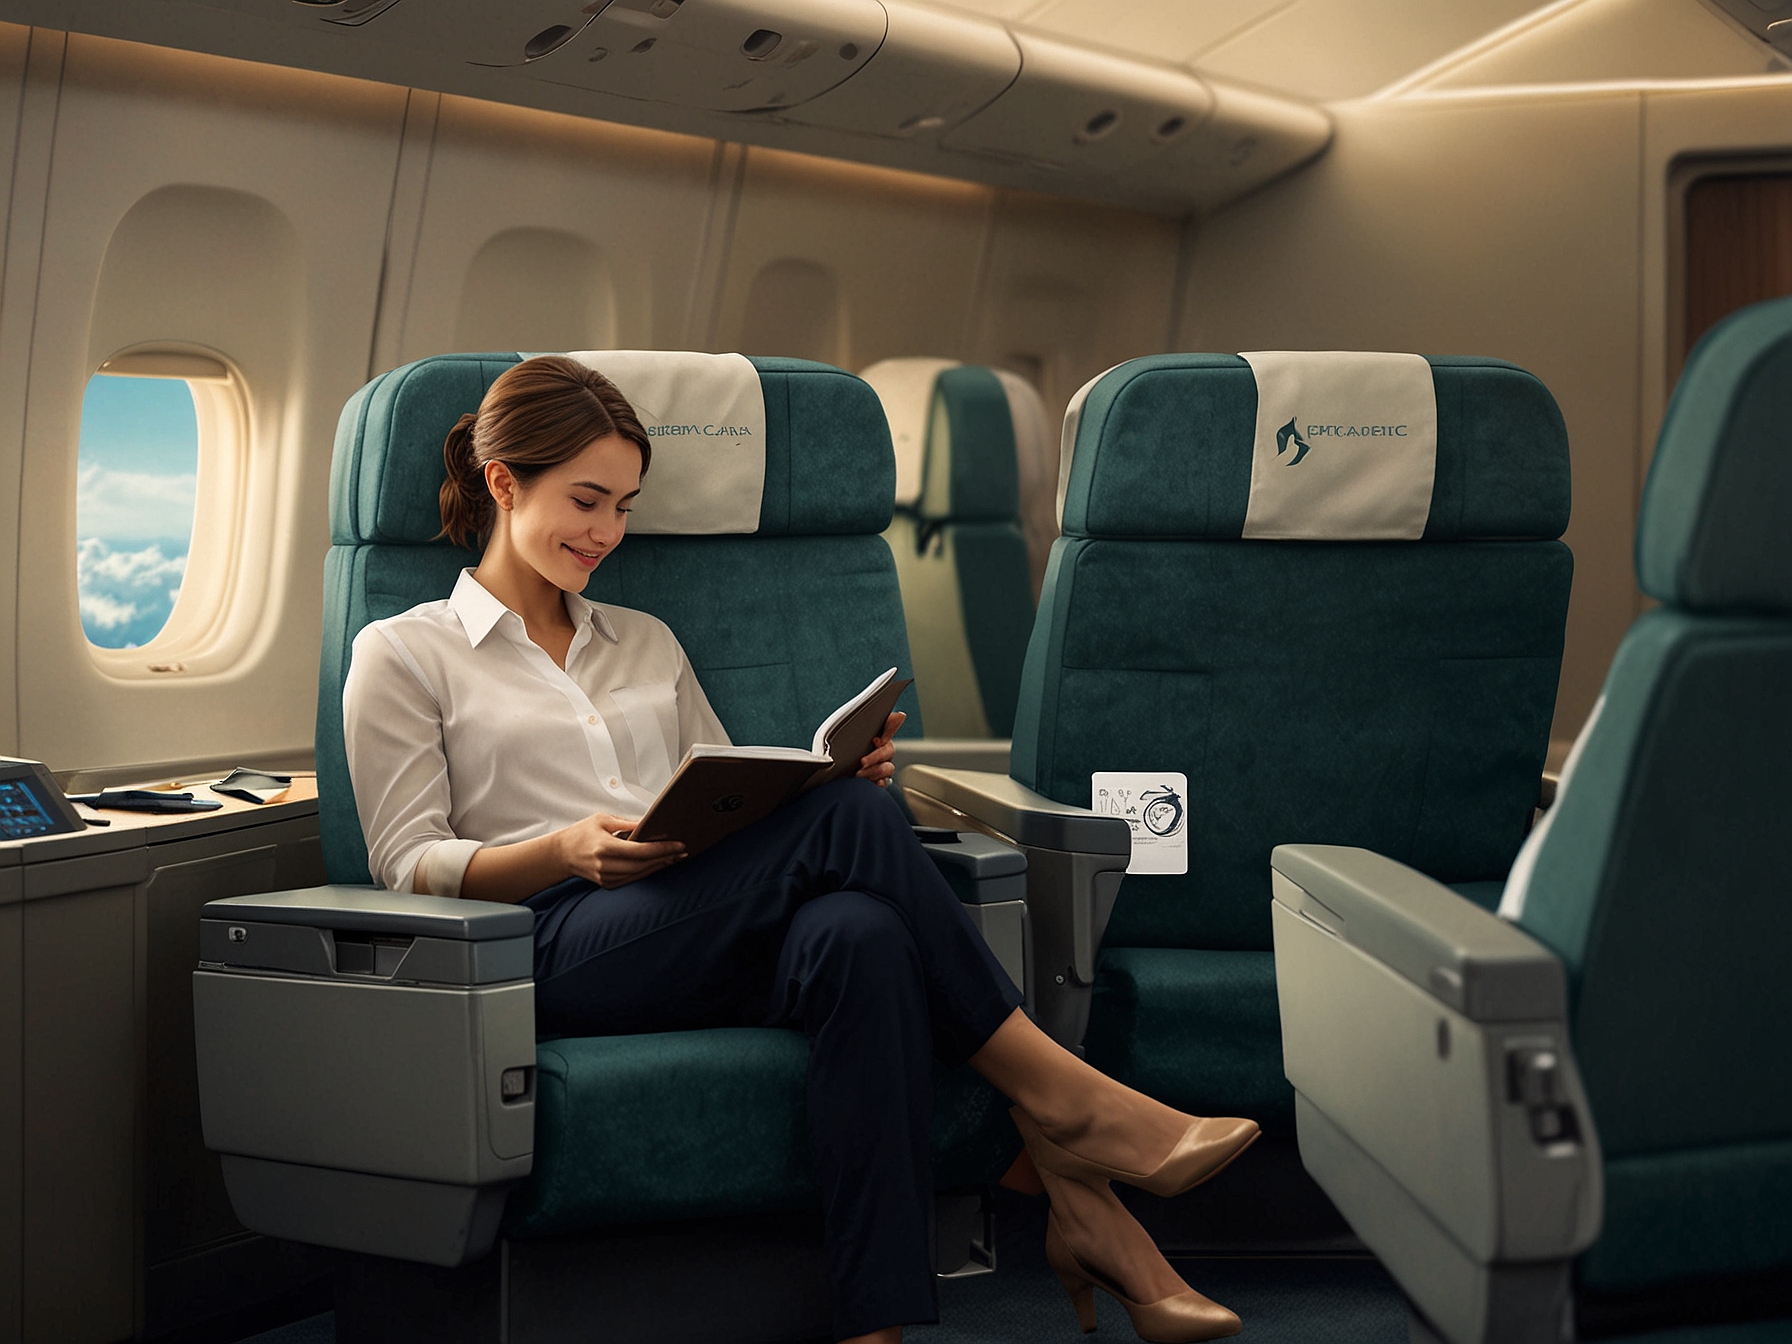 Harriet Sime experiencing cozy seating in Cathay Pacific's premium economy with footrest, enhanced legroom, and personal entertainment systems. The cabin shows the balance of comfort and affordability.